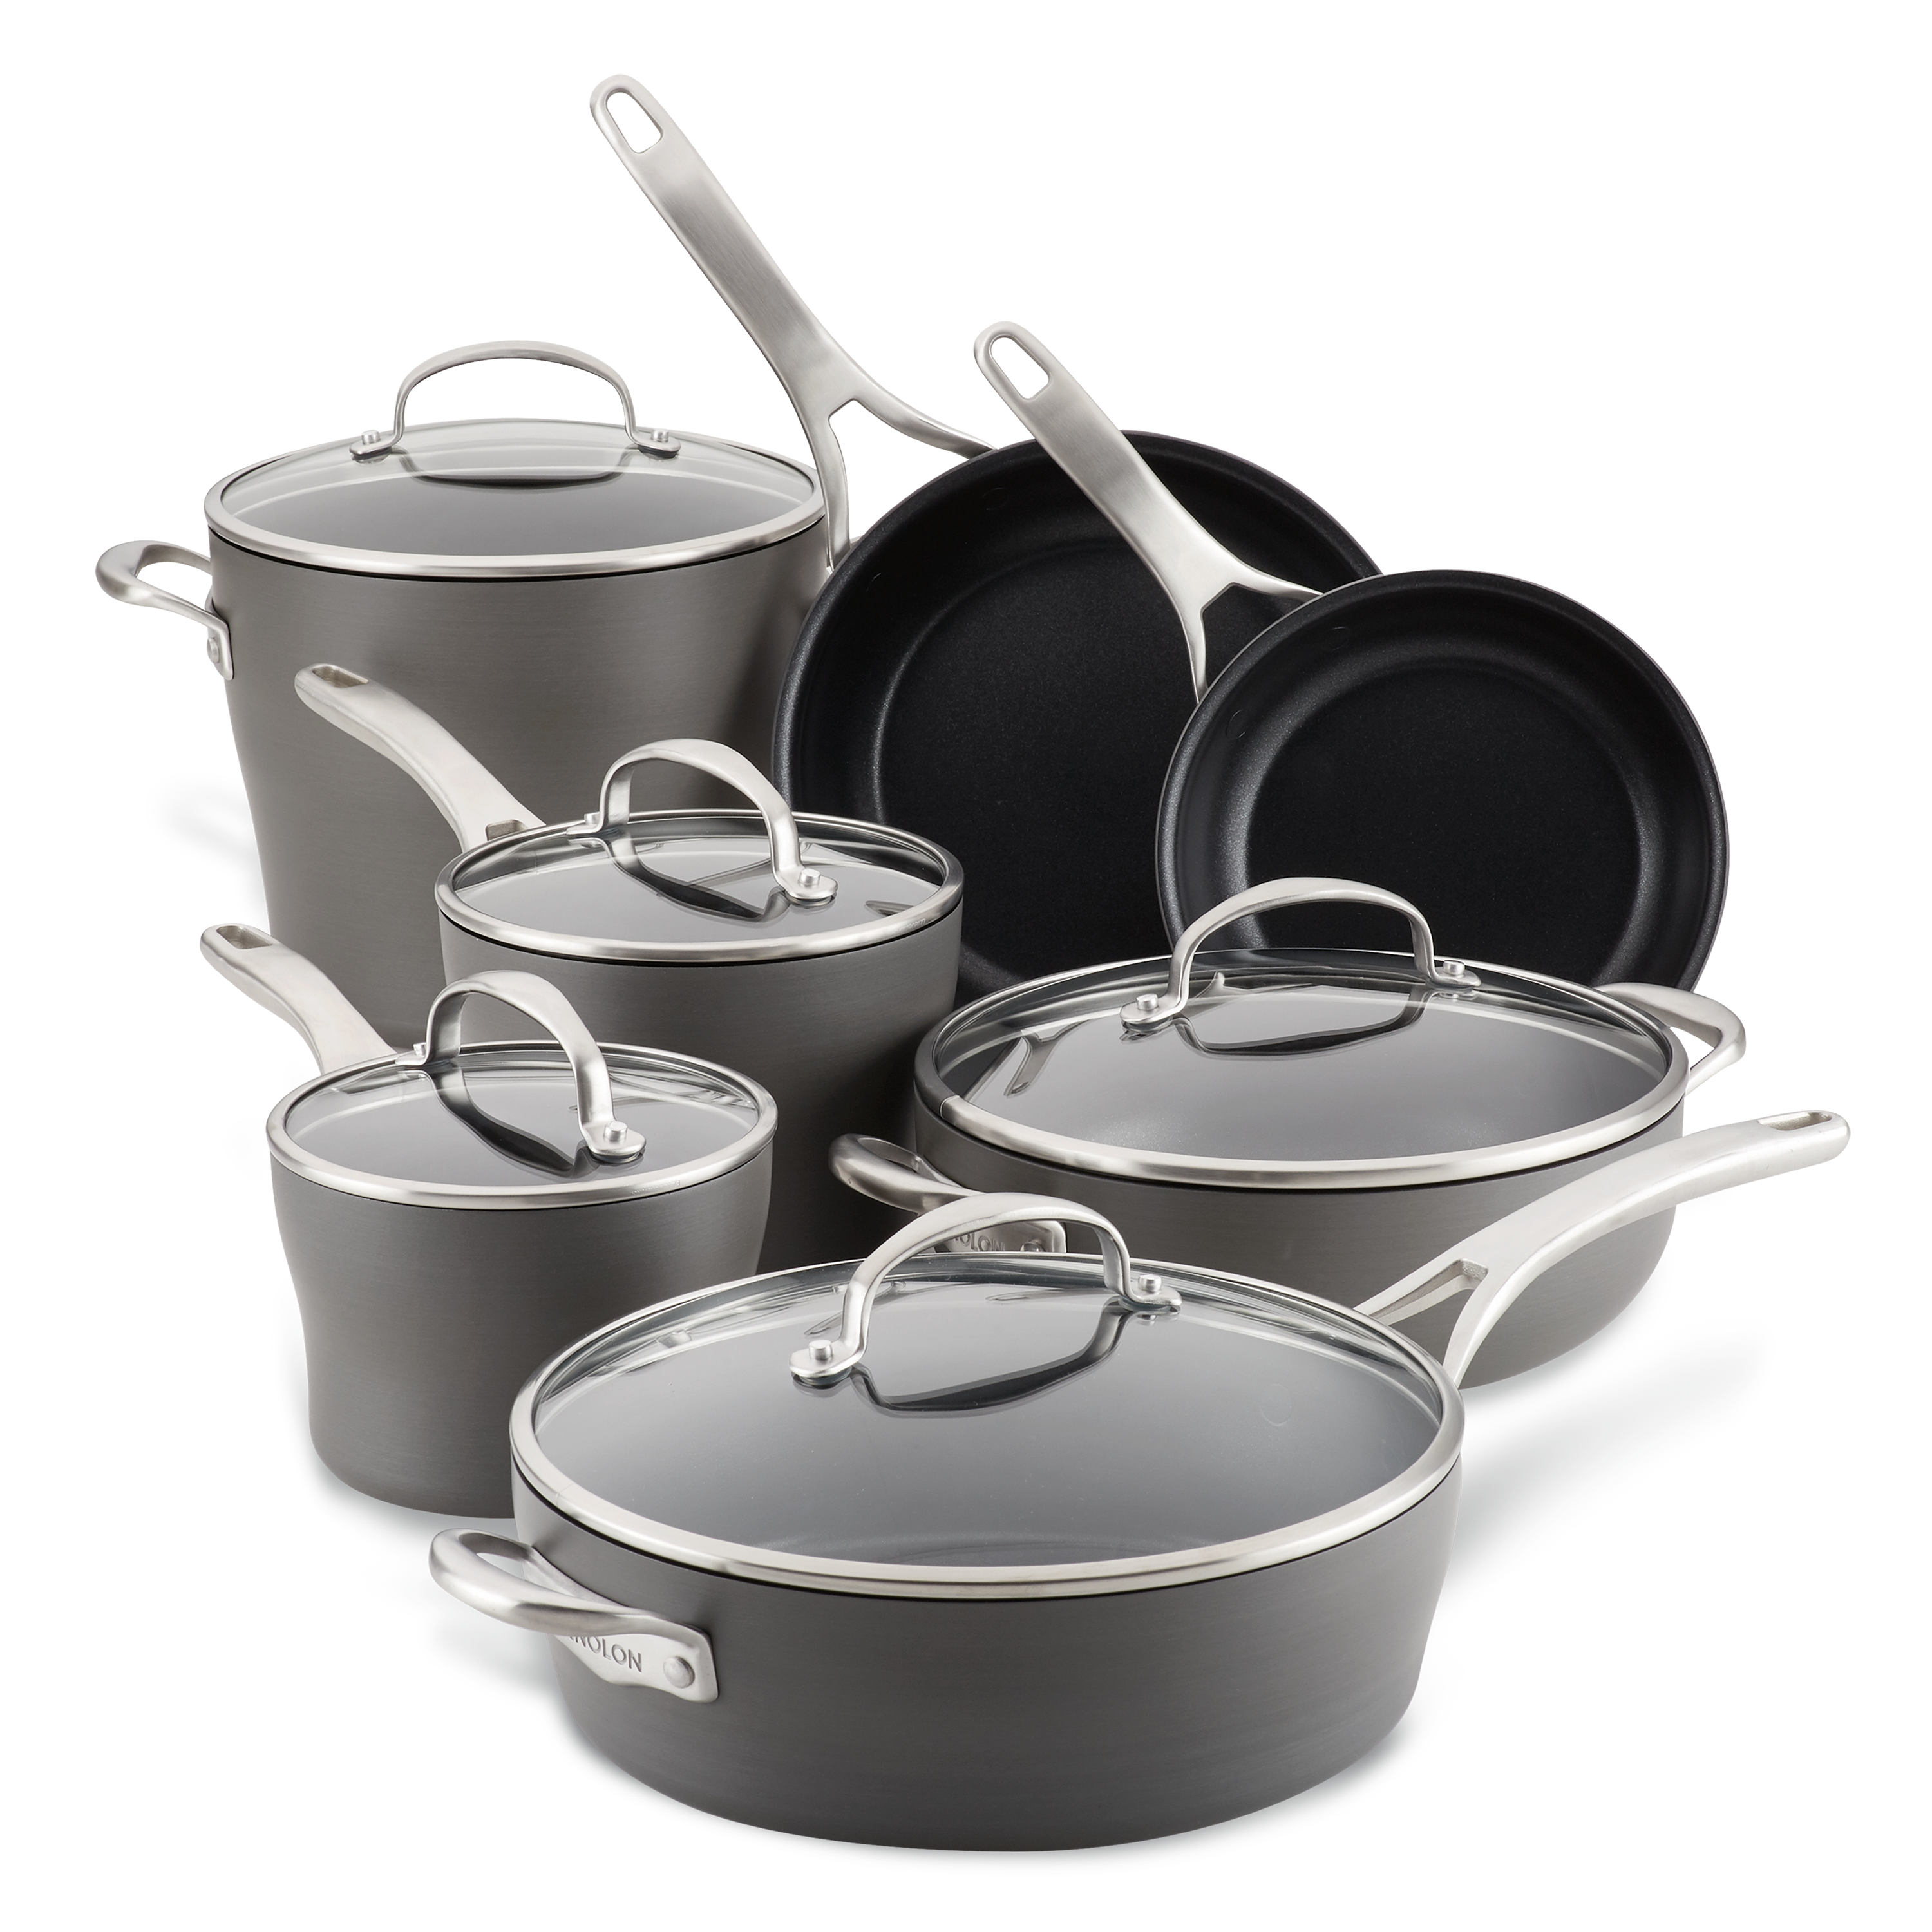 Anolon Cookware: Features, Review & 4 Performance Tests